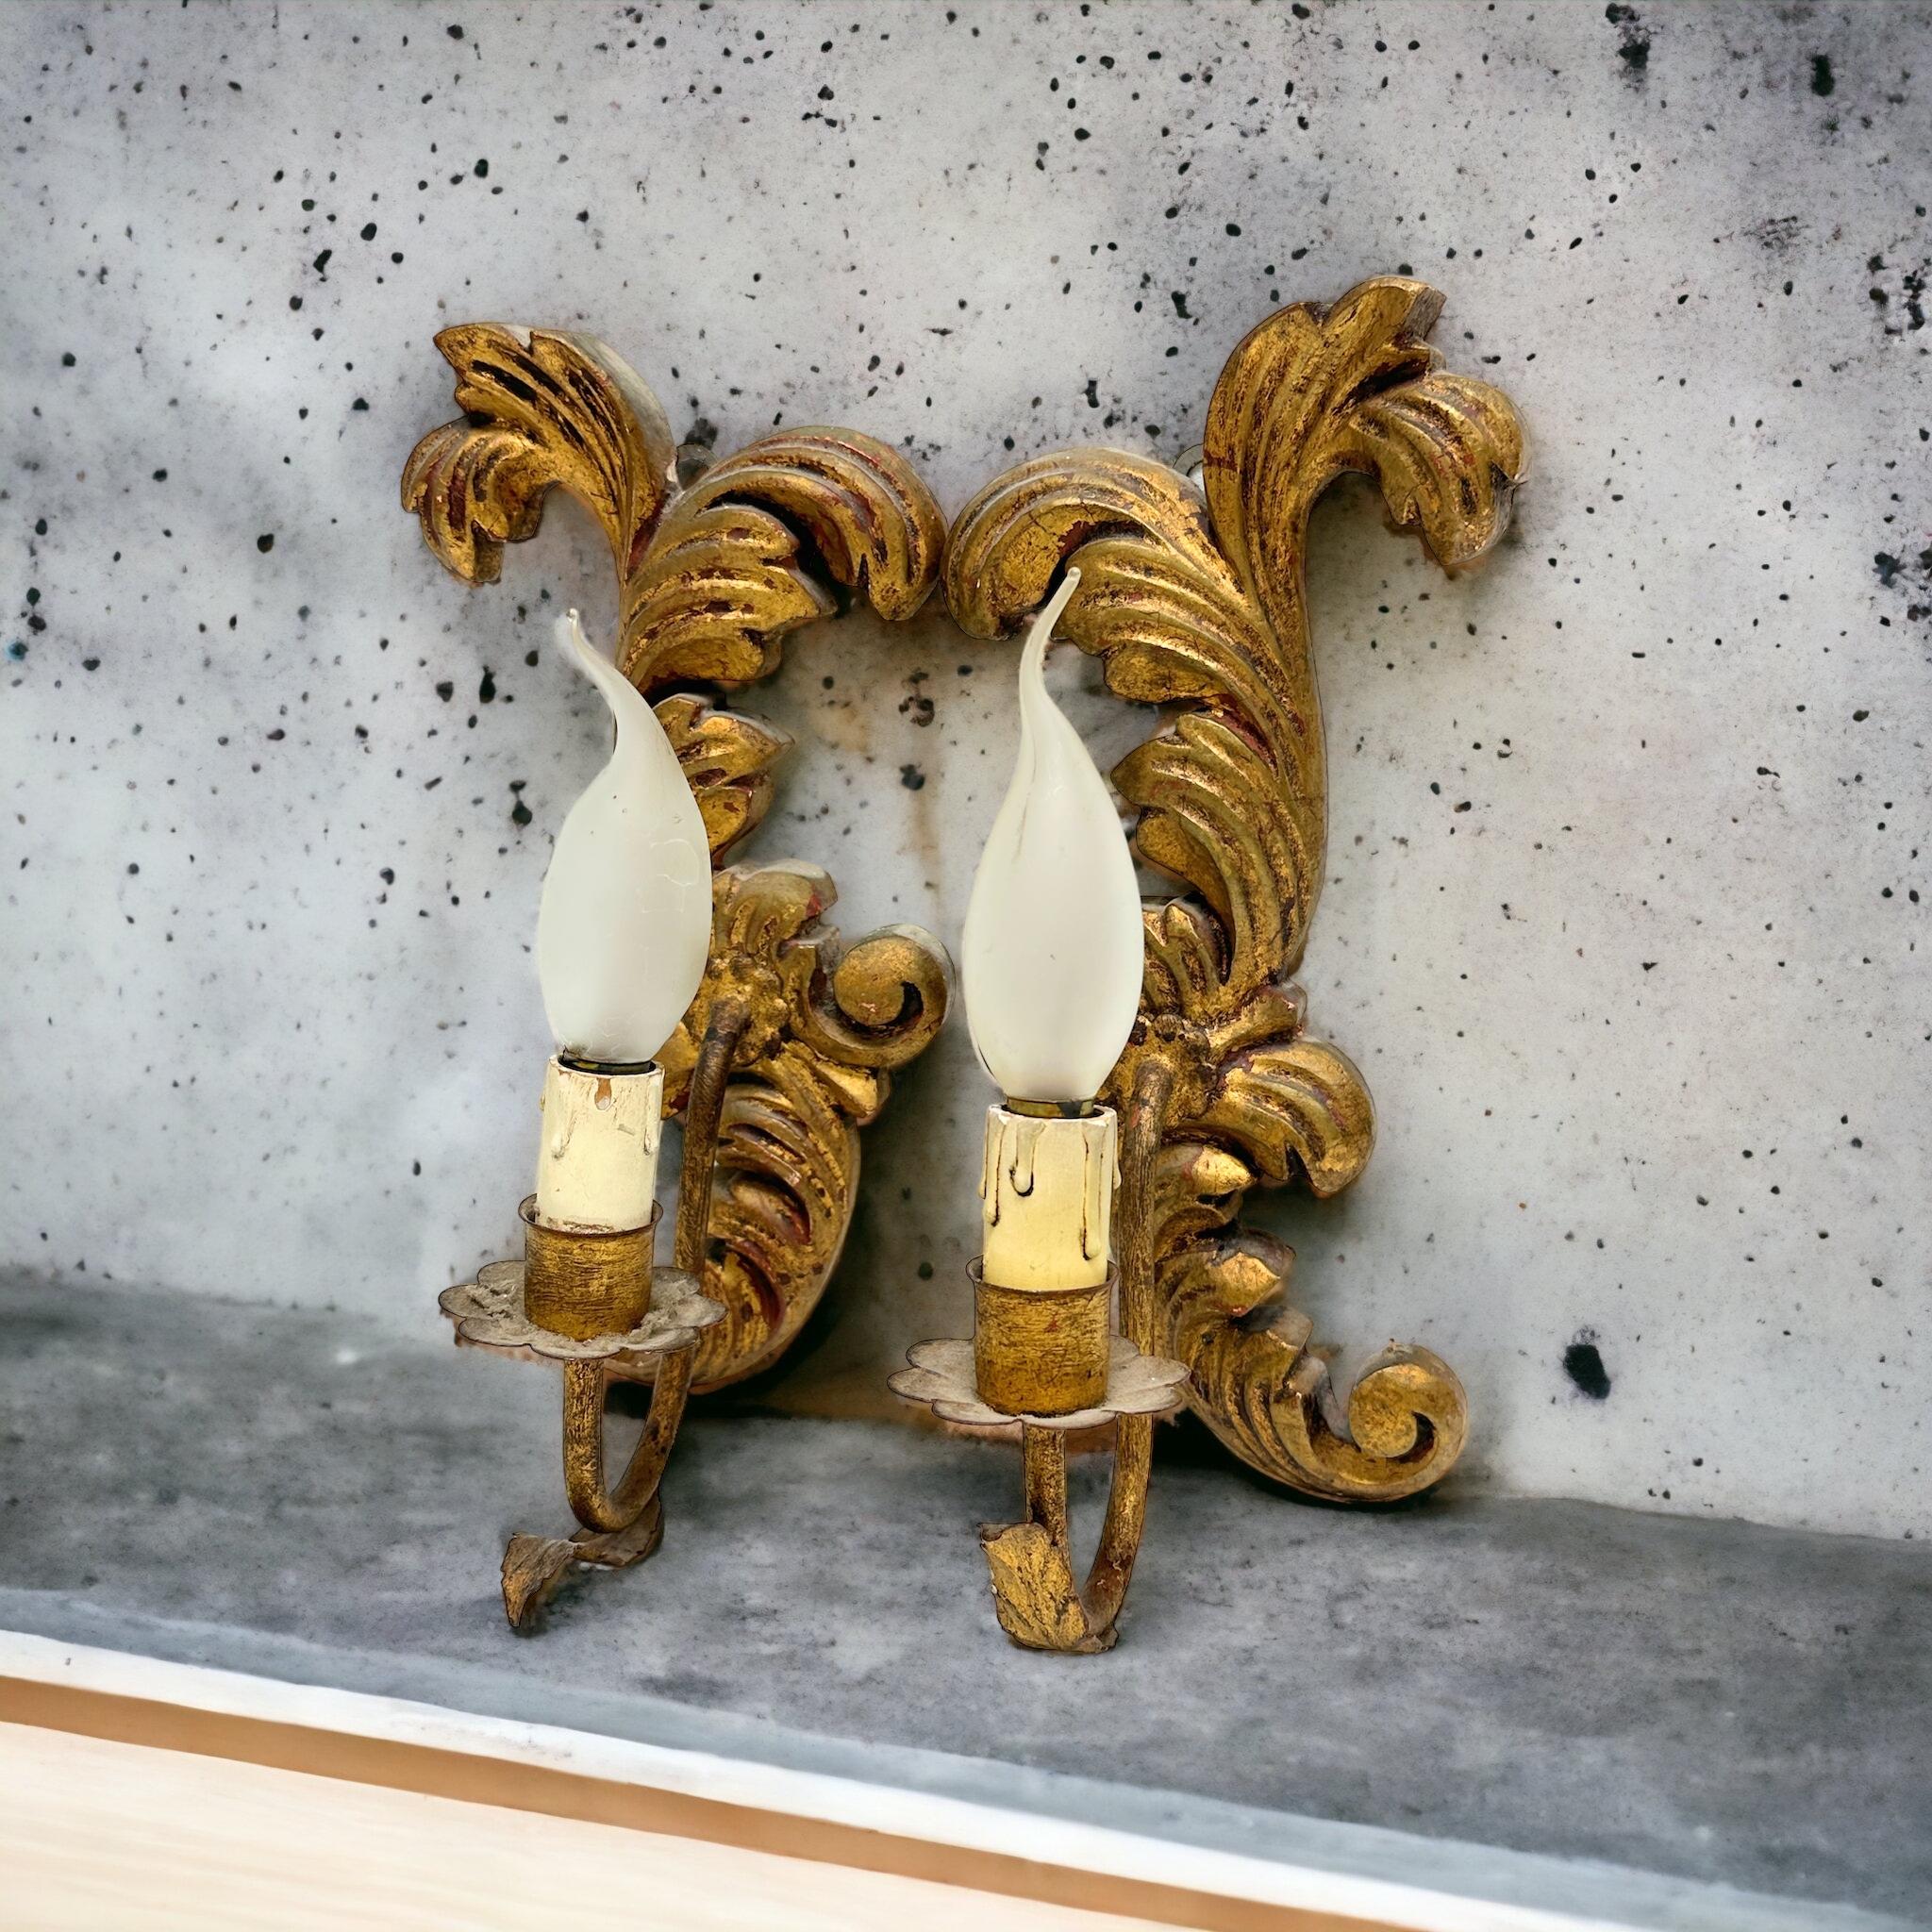 Add a touch of opulence to your home with this charming pair of sconces. Perfect gilded wood and metal to enhance any chic or eclectic home. We would like to see it hanging in an entryway as a charming welcome home. Constructed in the 1910s or